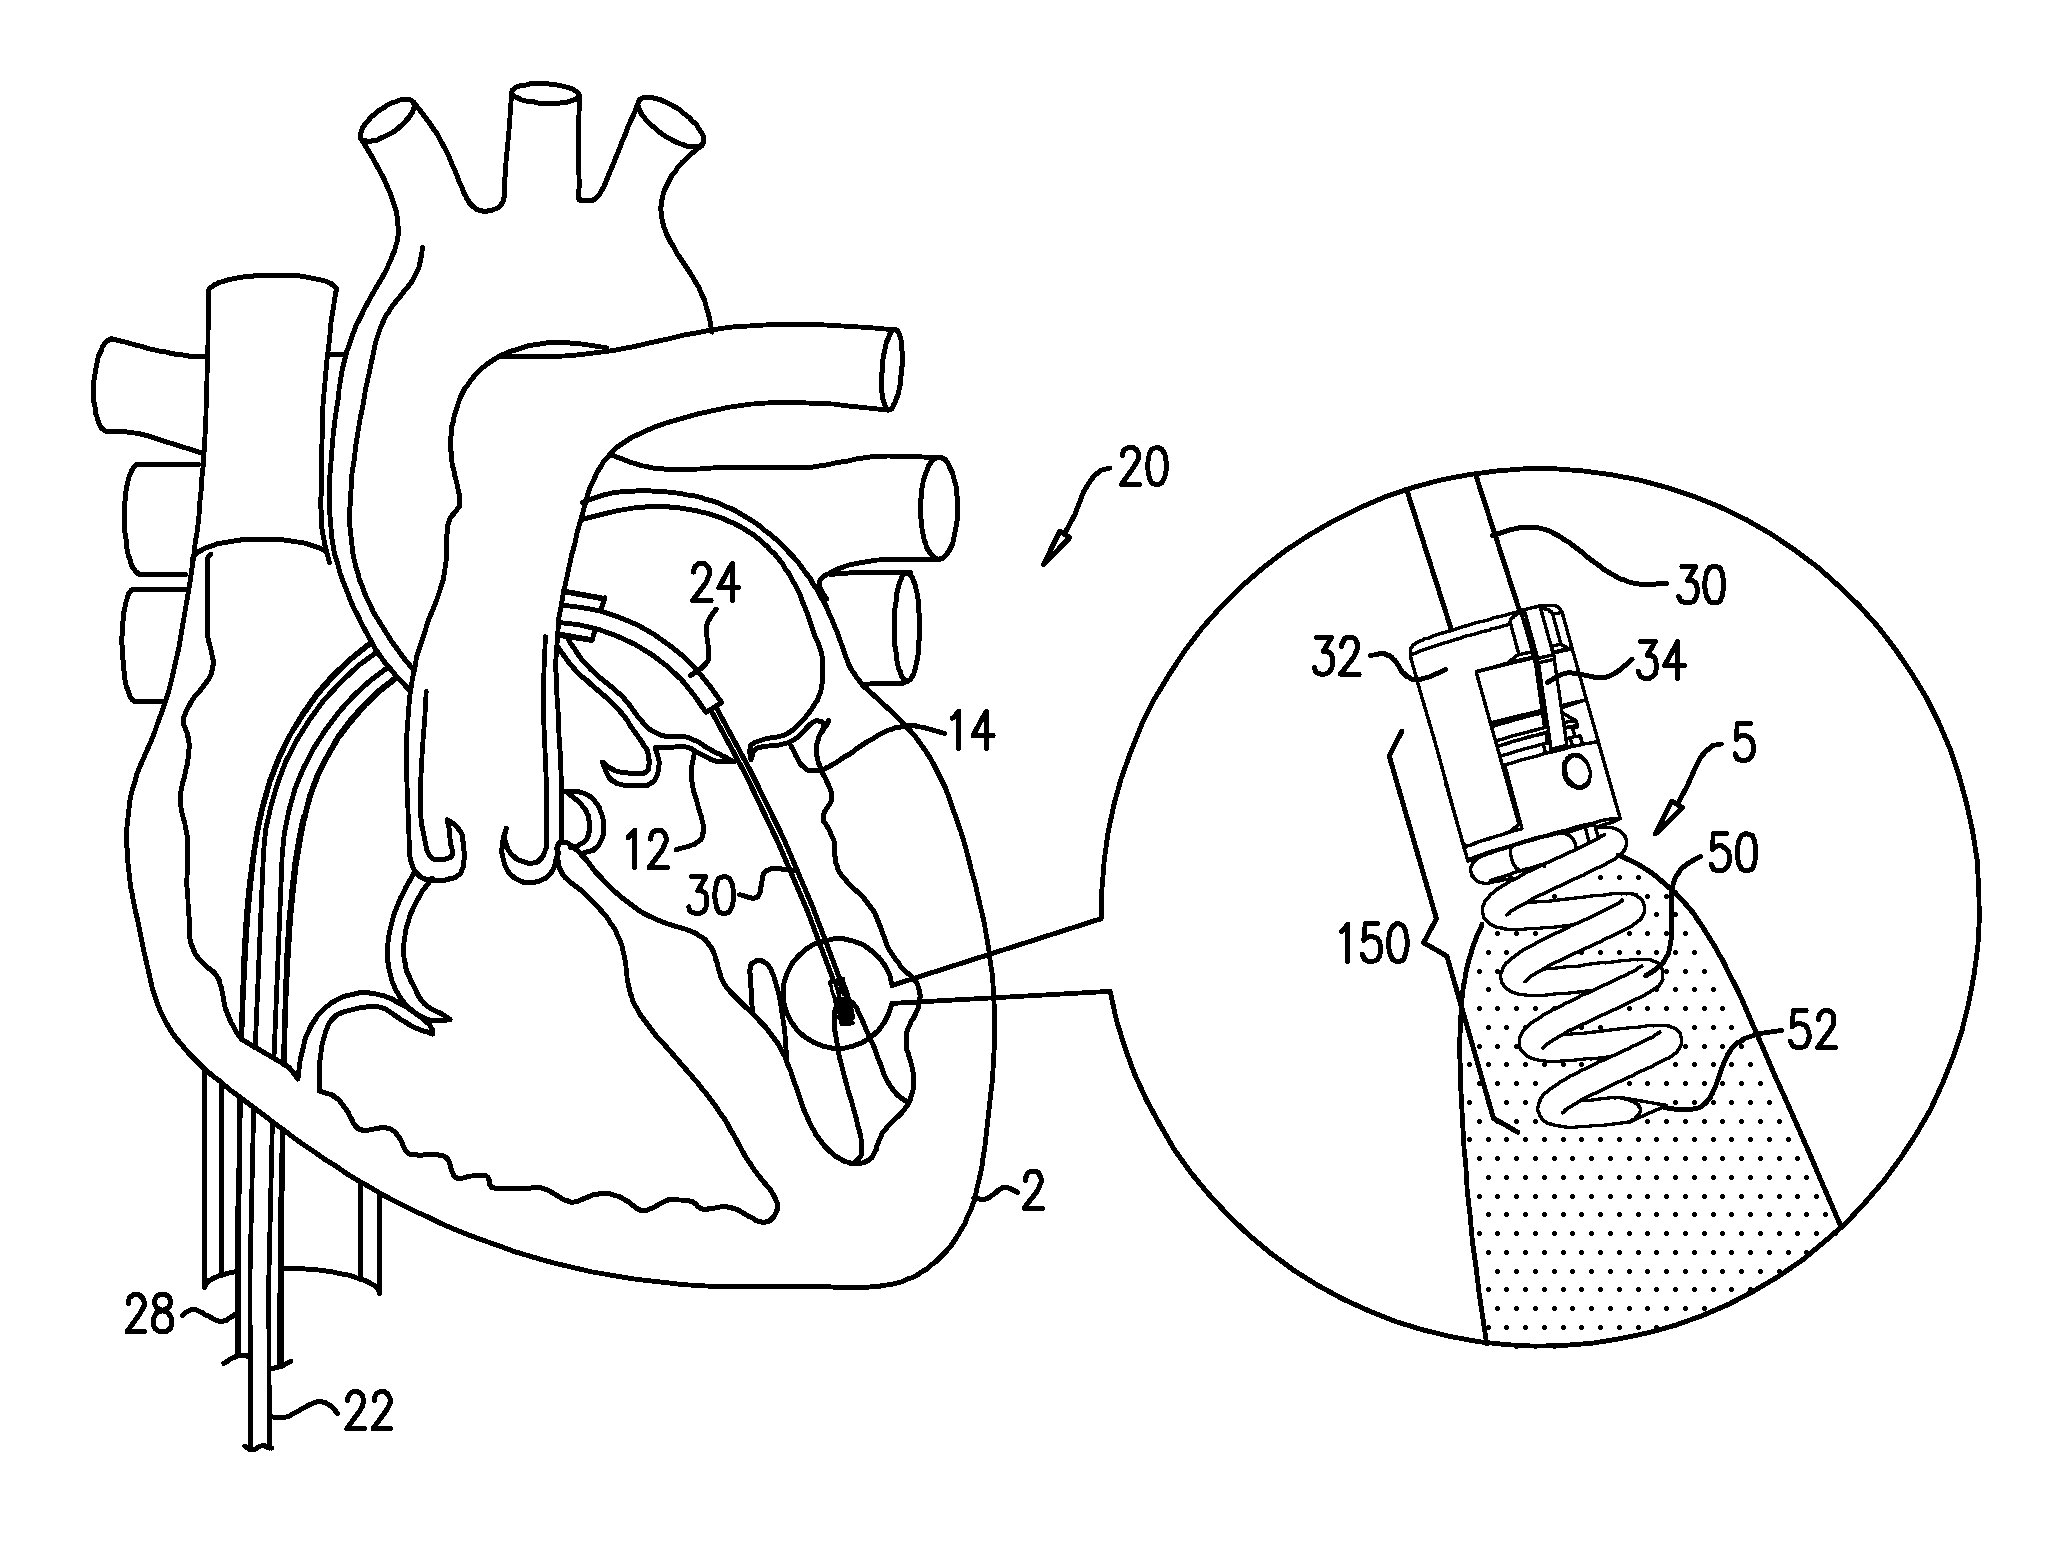 Apparatus and method for guide-wire based advancement of a rotation assembly